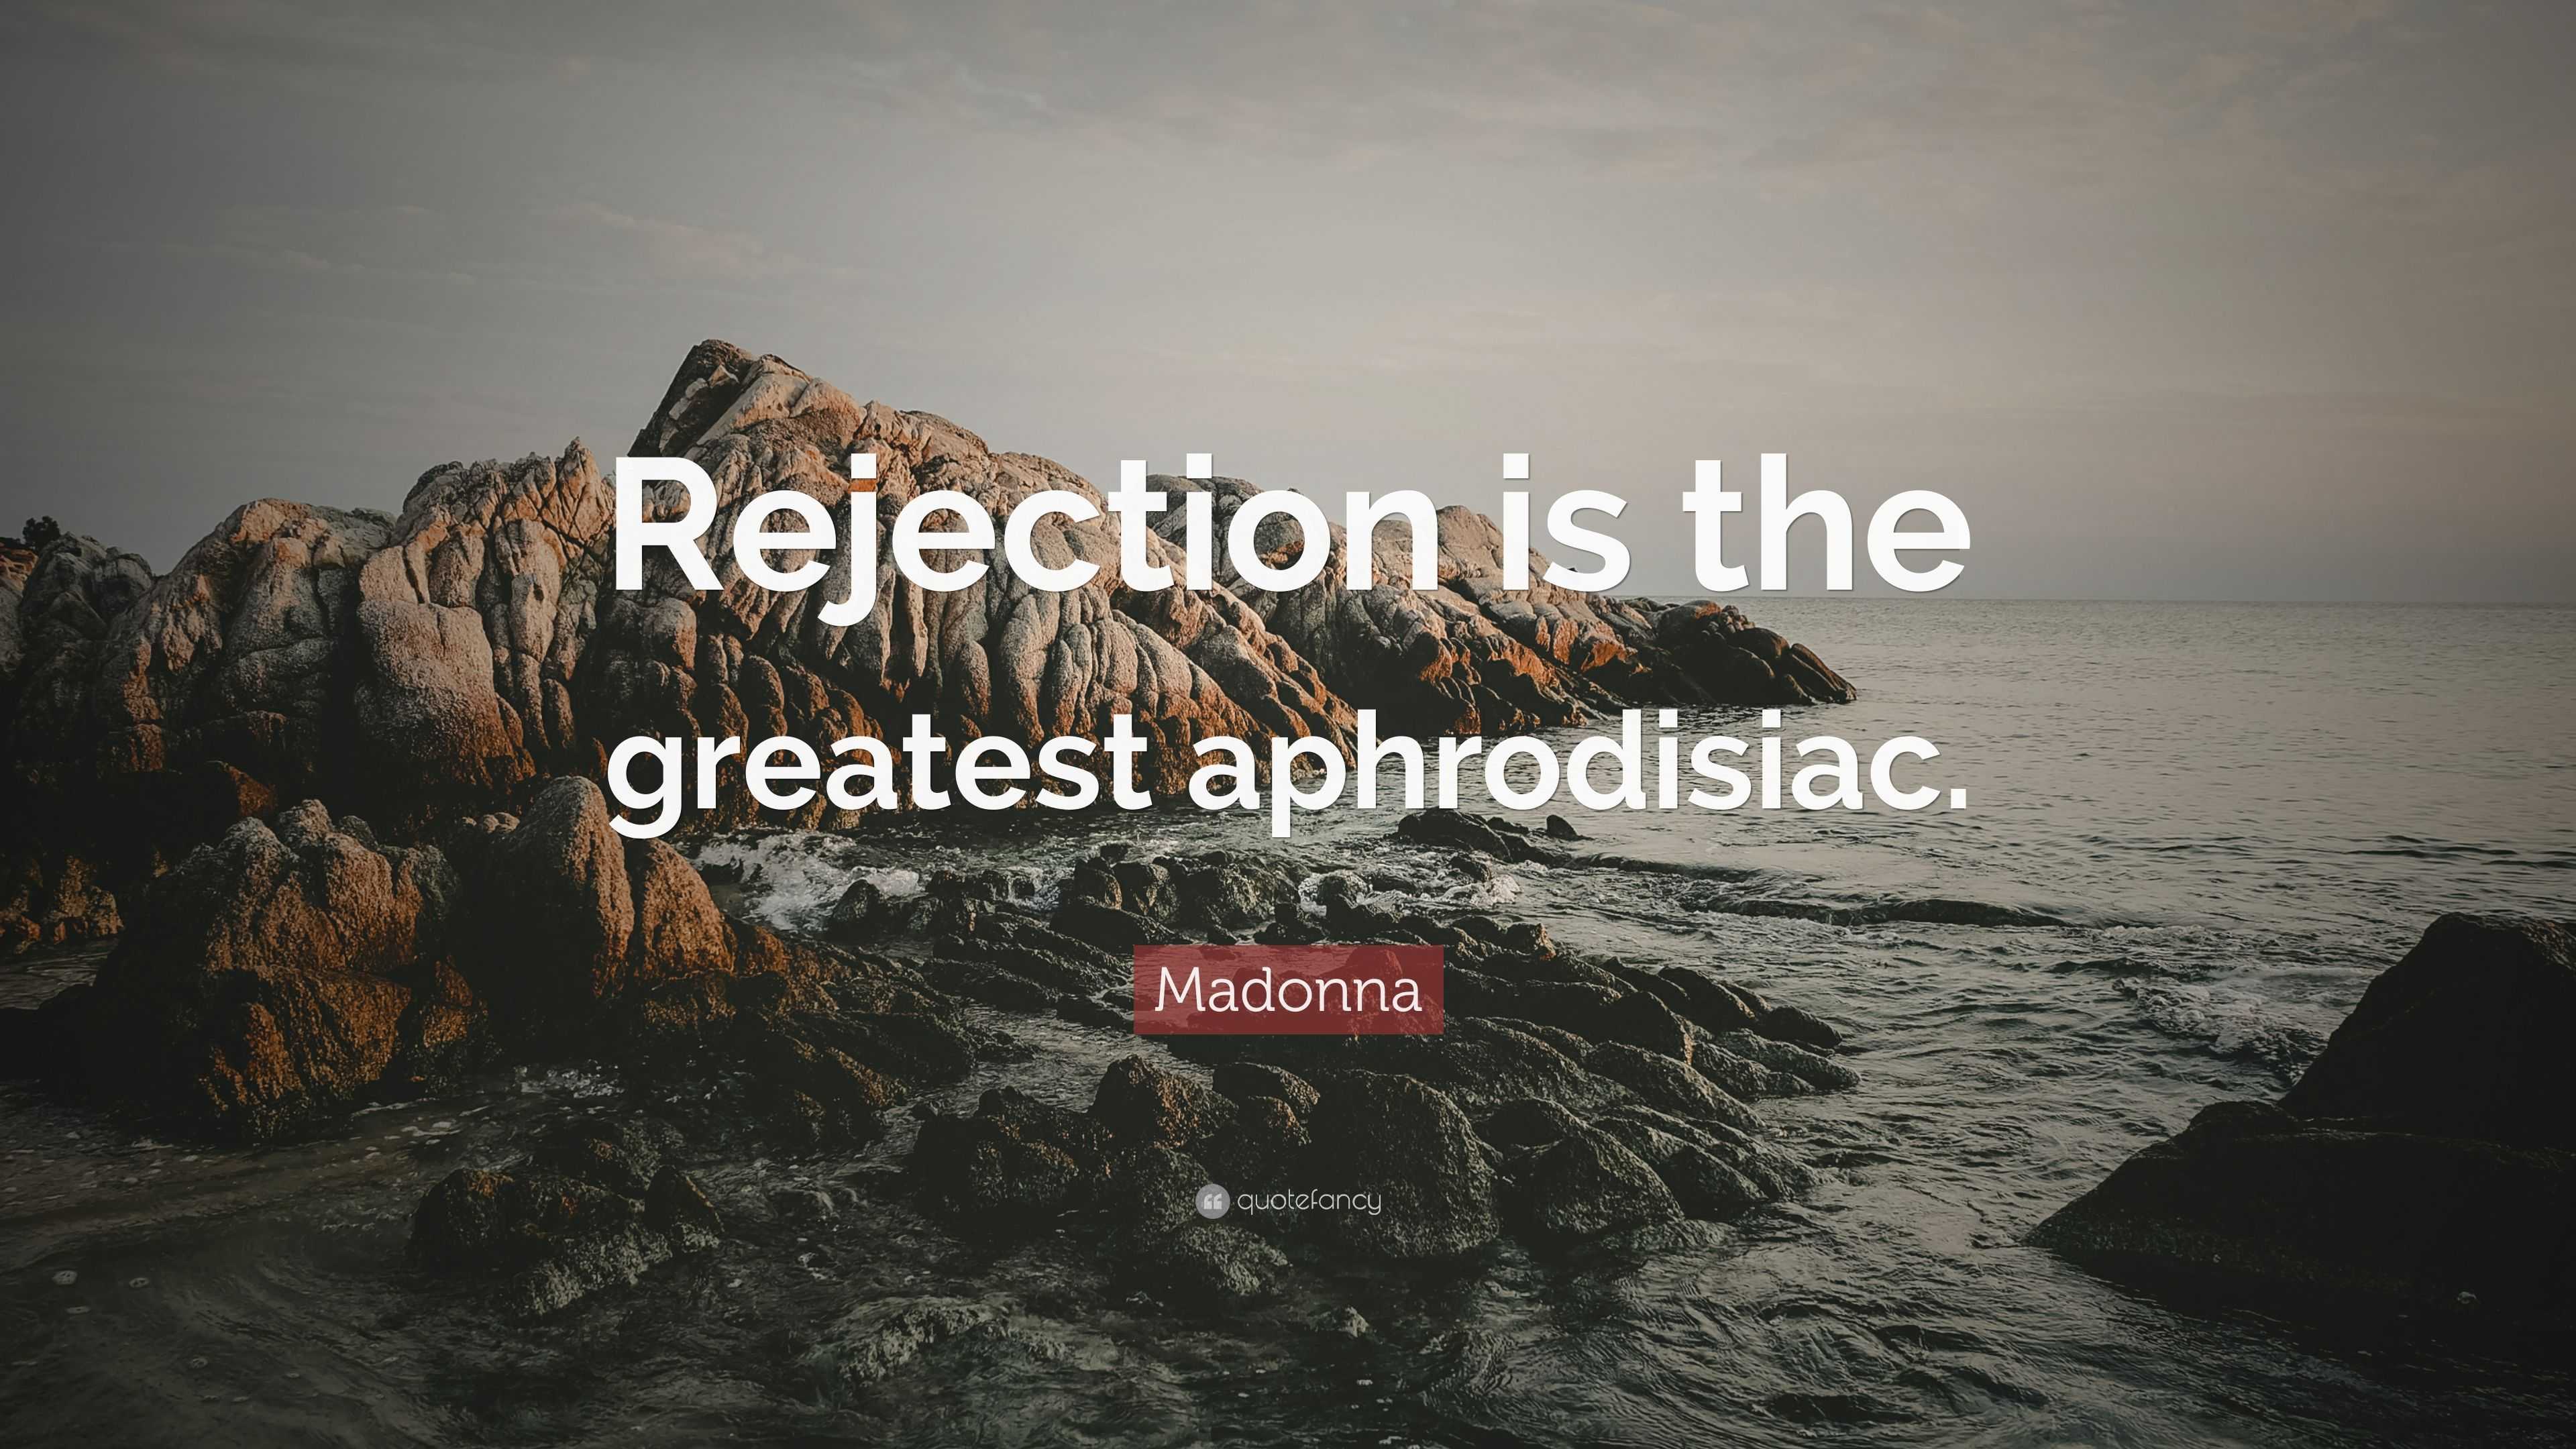 Rejection is the greatest aphrodisiac